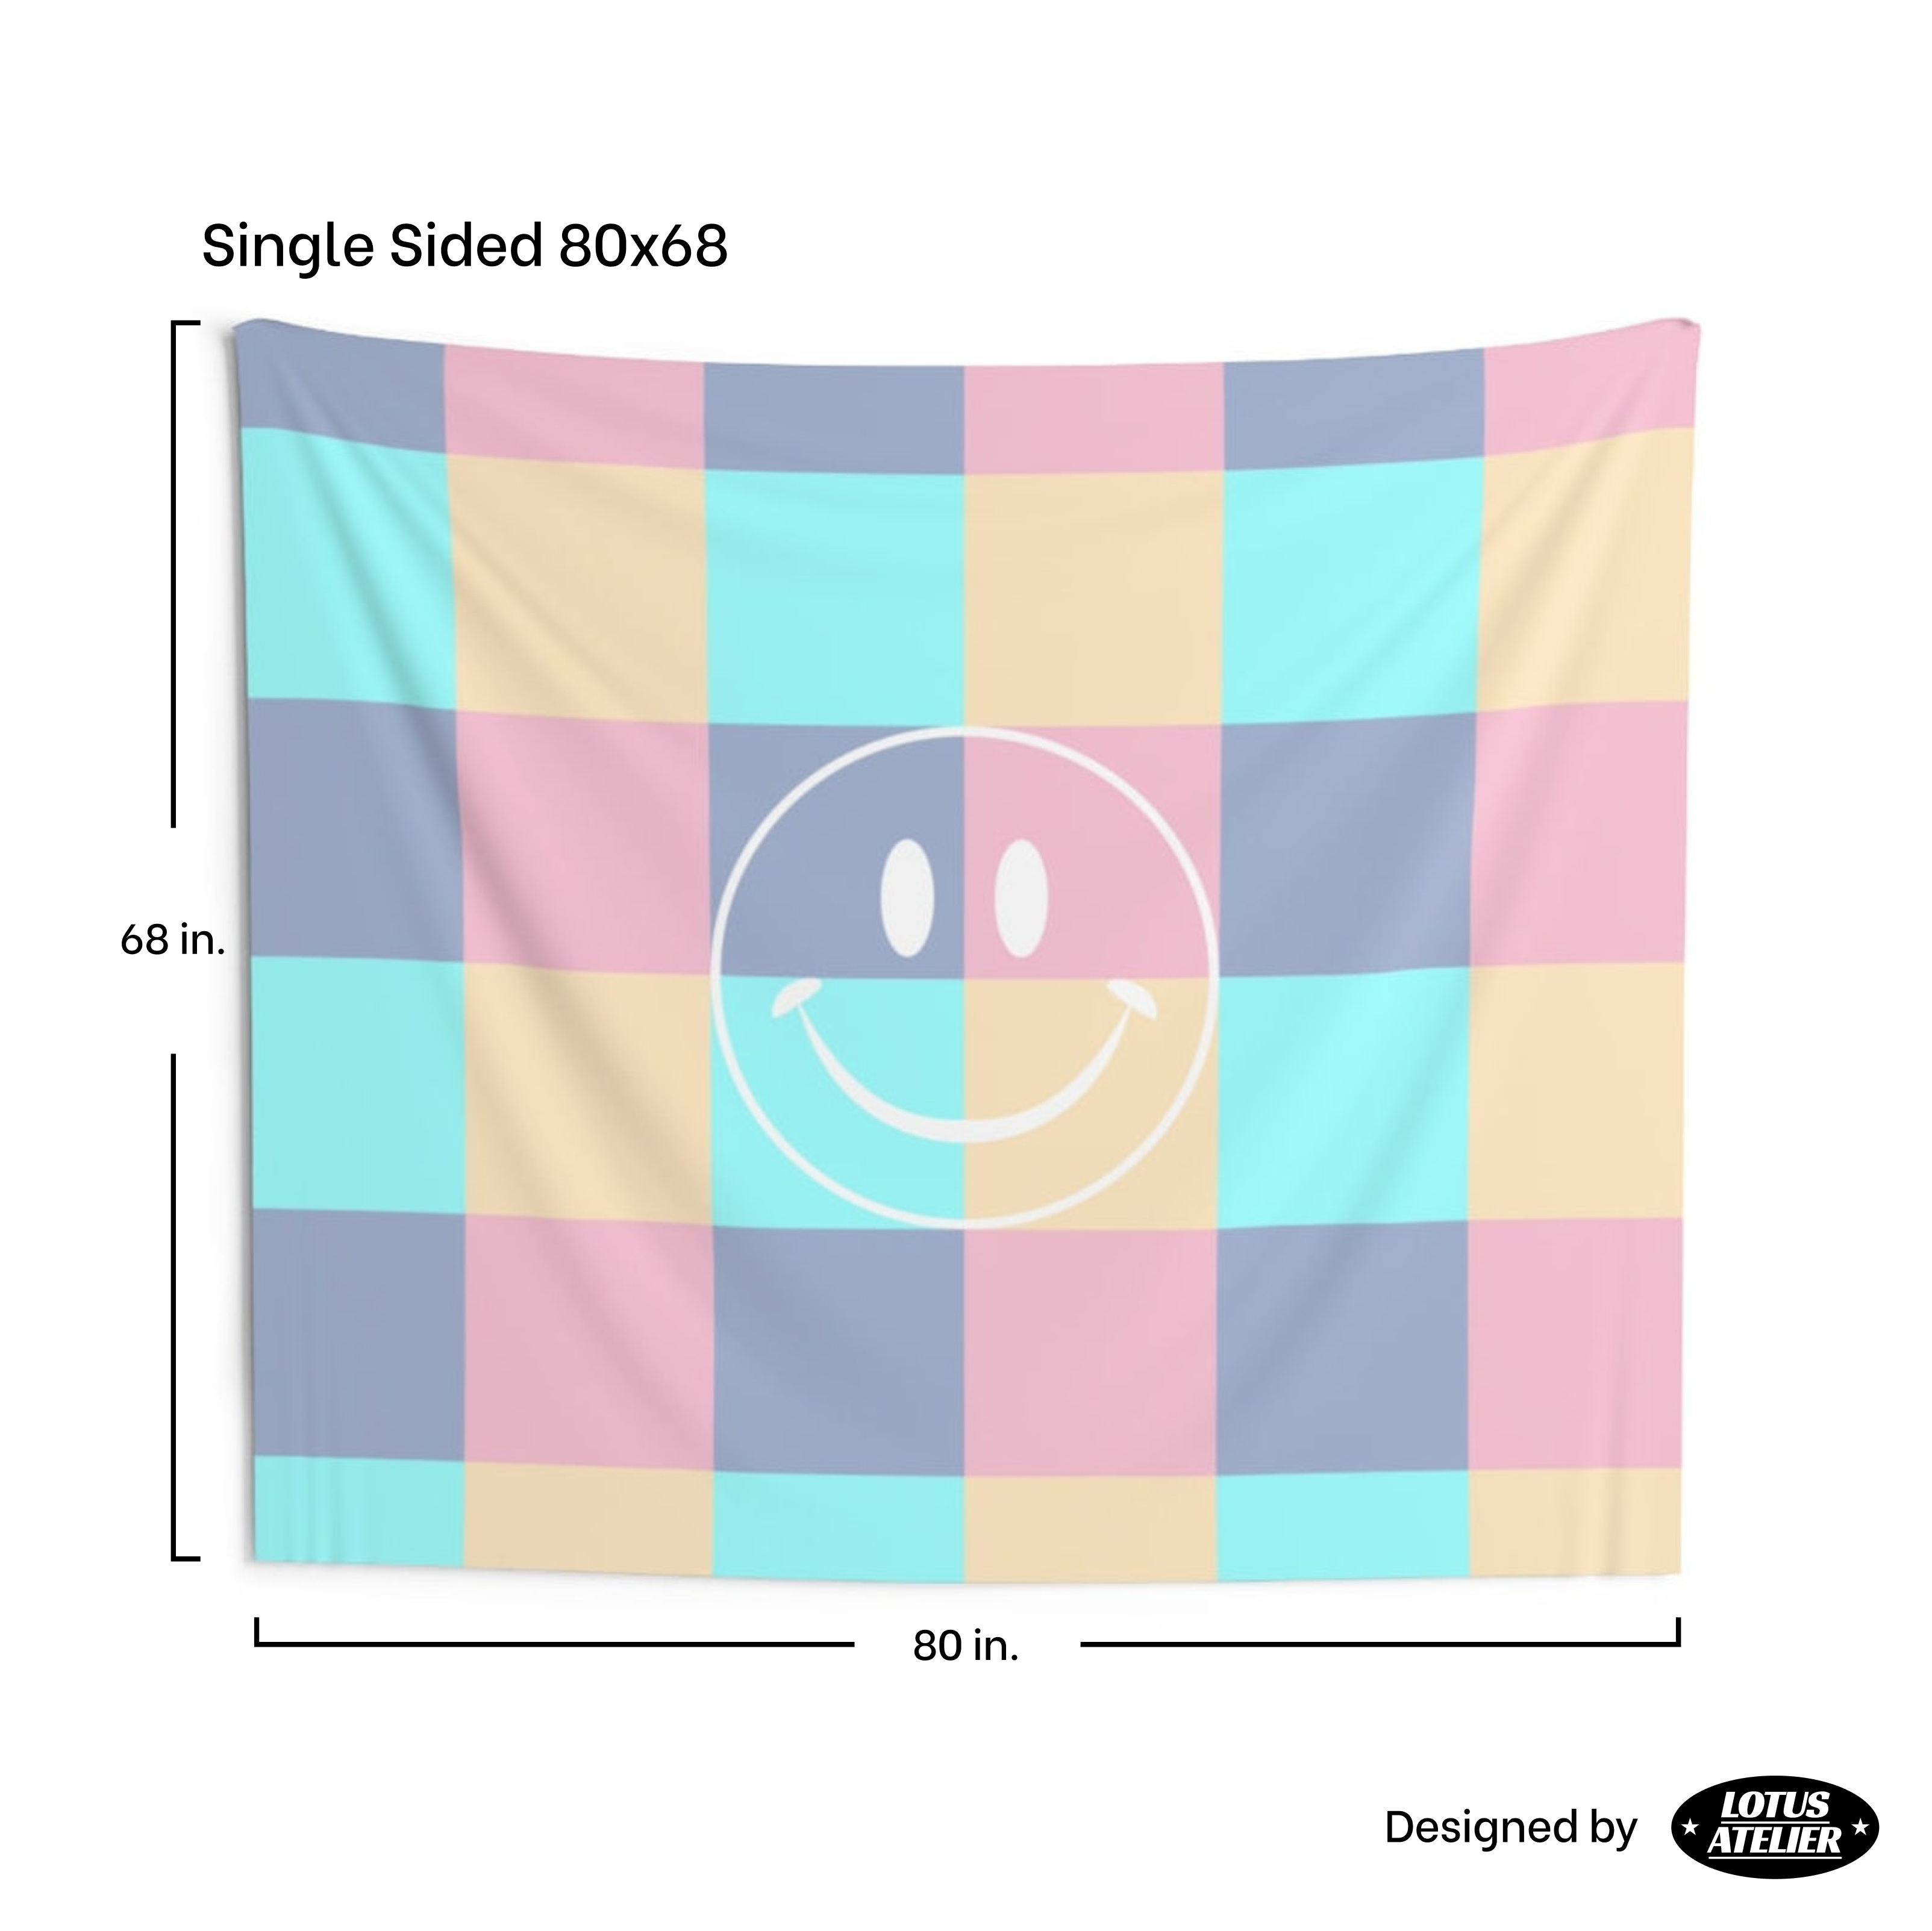 Smiley Face Pastel Tapestry | Preppy Room Decor For Teen Bedroom, Apartment and Living Room Wall Hanging | College Dorm Decor | Multiple Sizes